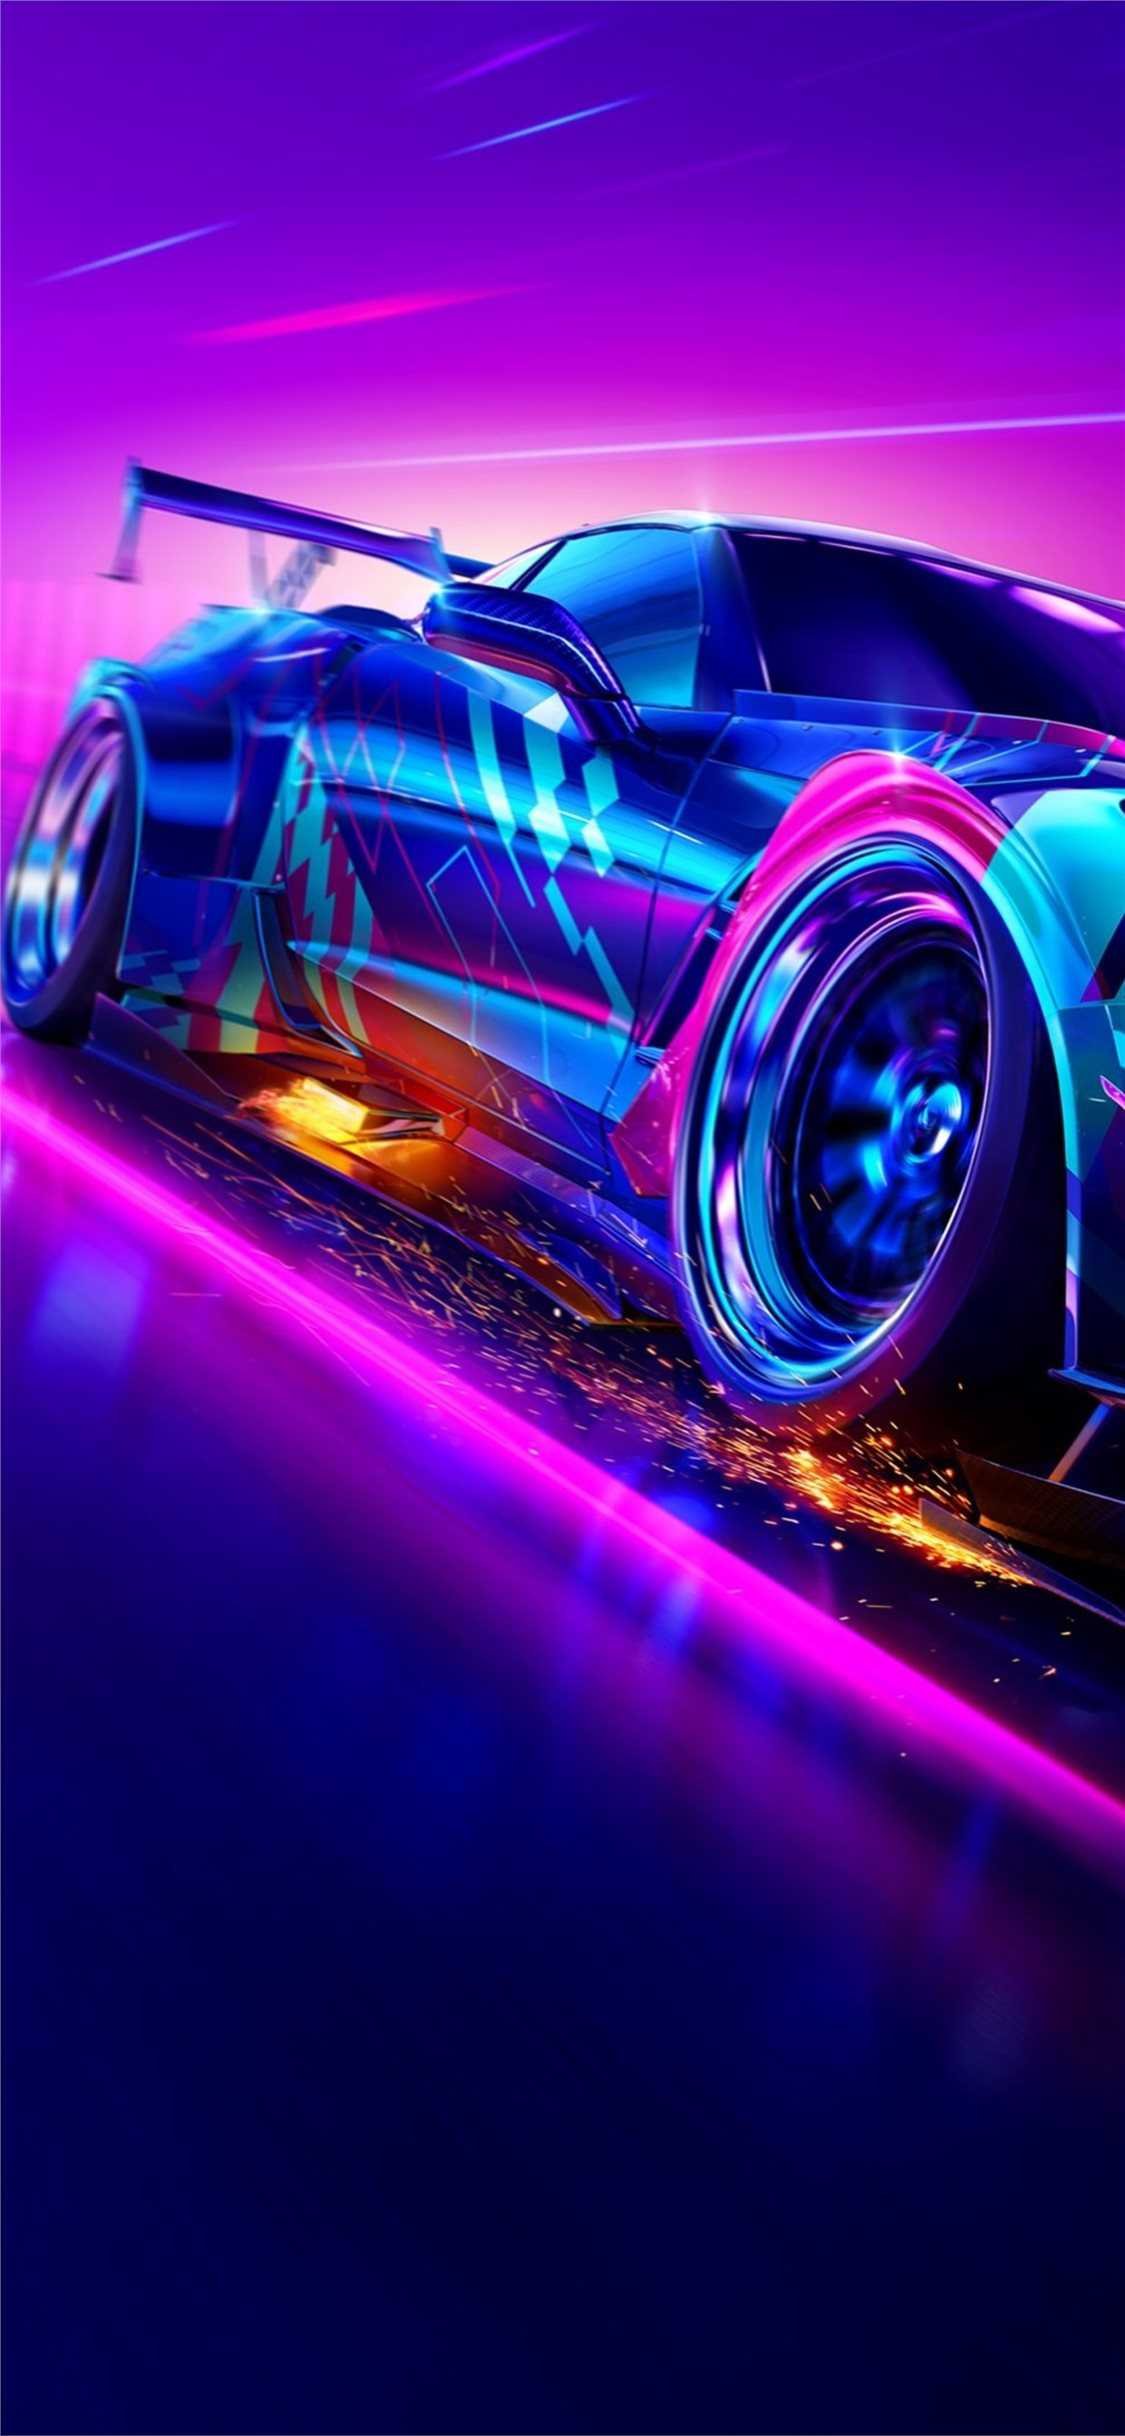 Best Need for speed iPhone HD Wallpapers  iLikeWallpaper